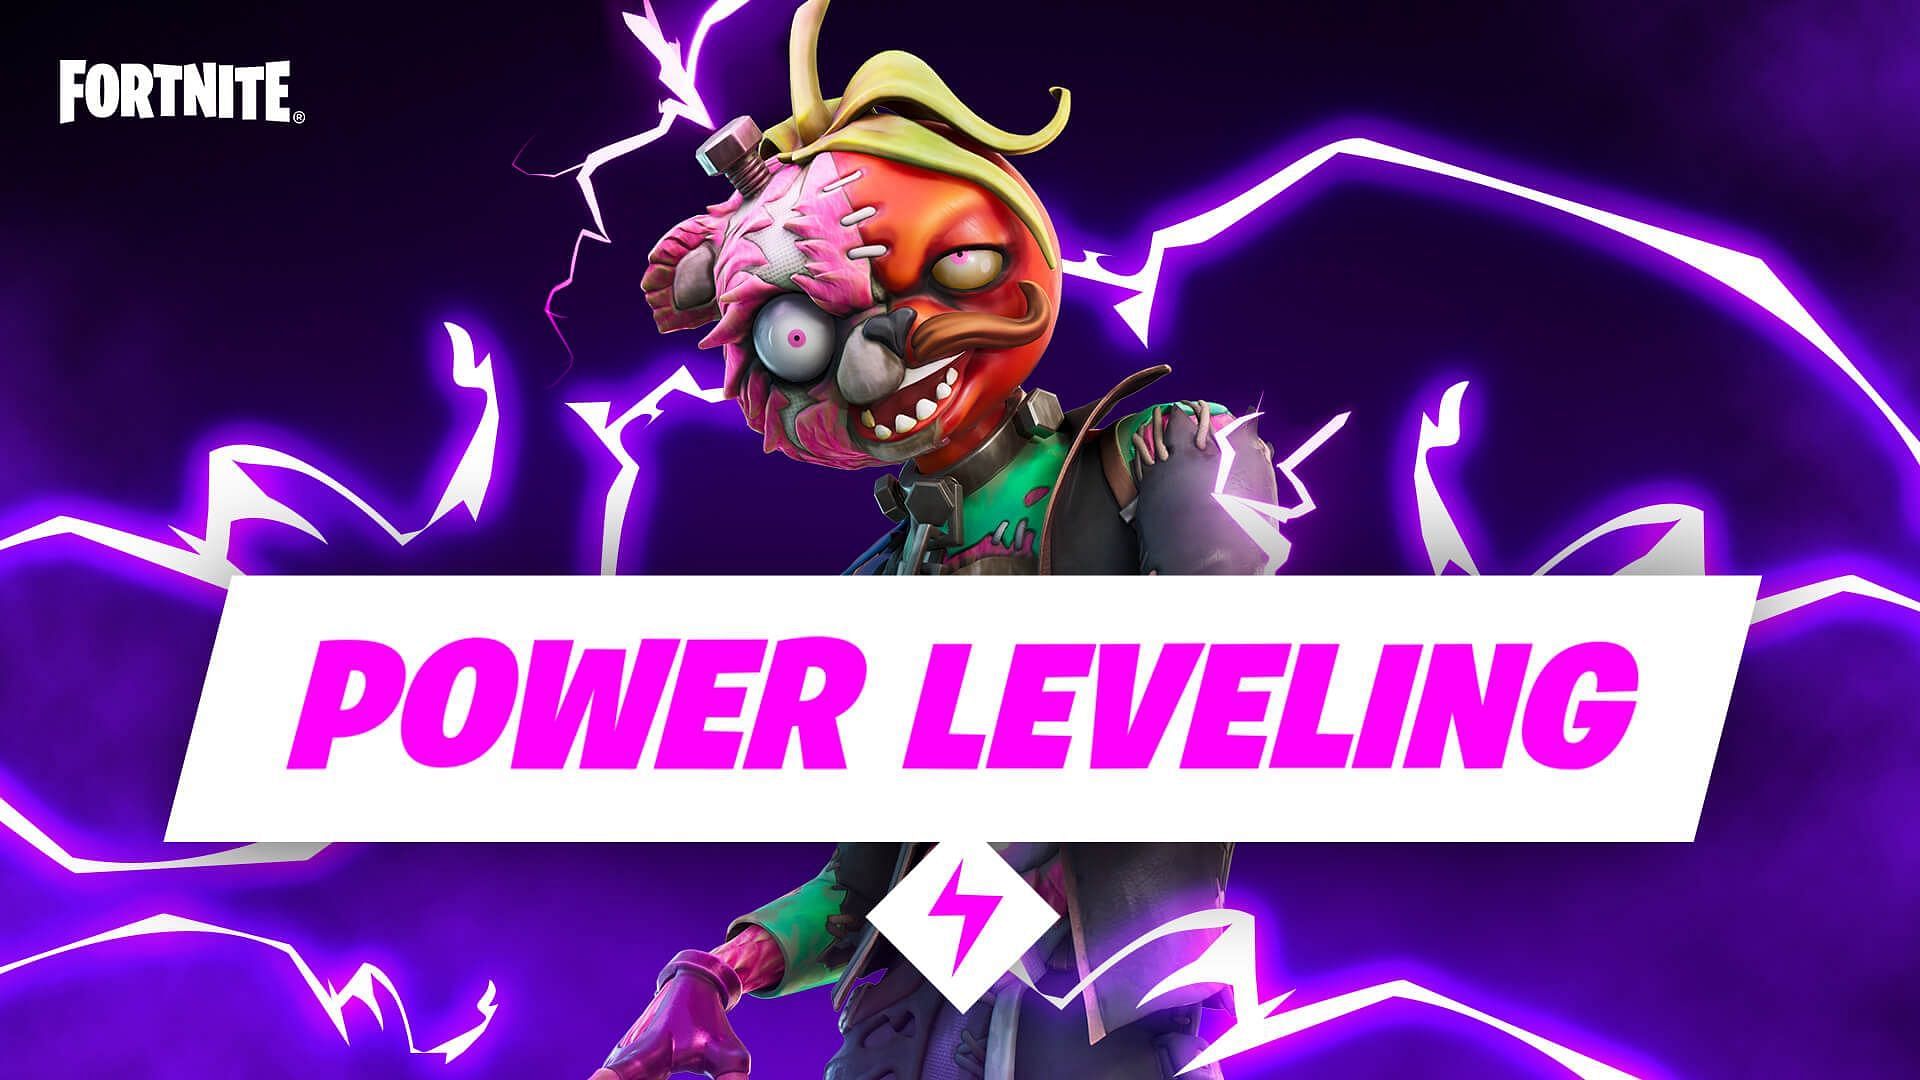 Supercharged XP in Fortnite is great way to level up or is it? (Image via Twitter/FortniteBR)